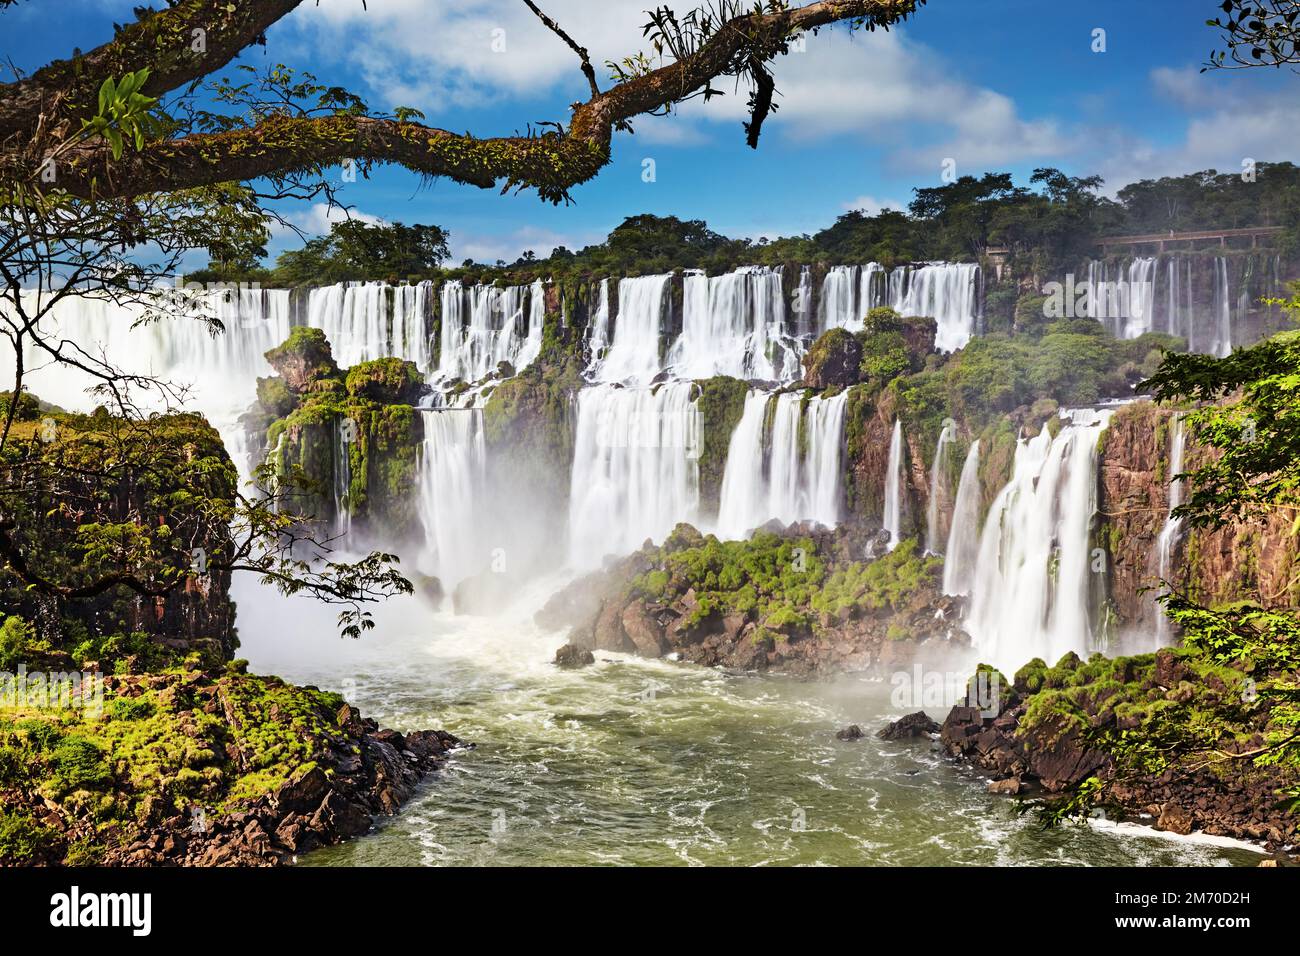 Iguassu Falls, the largest series of waterfalls of the world, located at the Brazilian and Argentinian border, View from Argentinian side Stock Photo